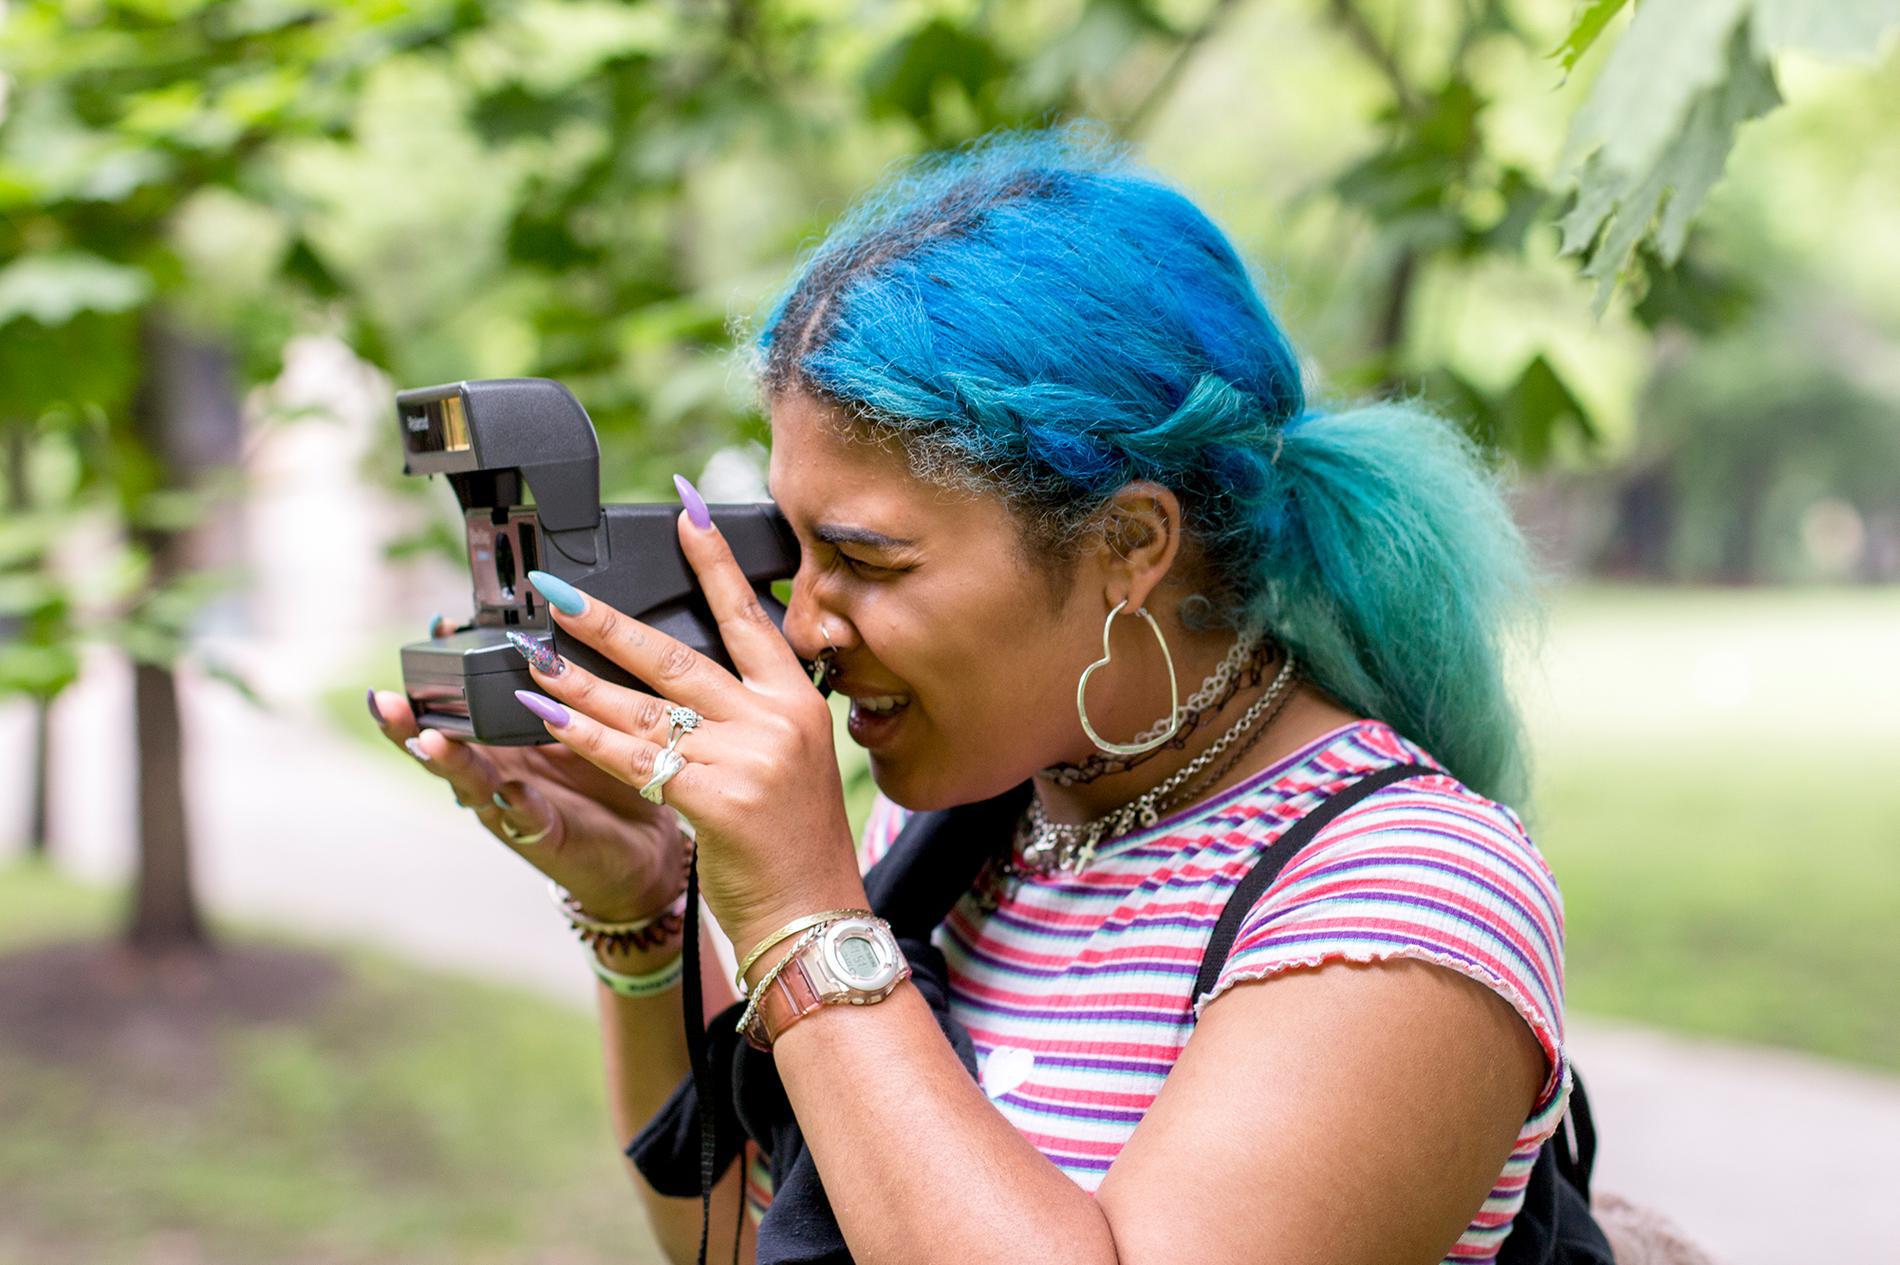 blue haired girl takes looks through viewfinder of polaroid camera